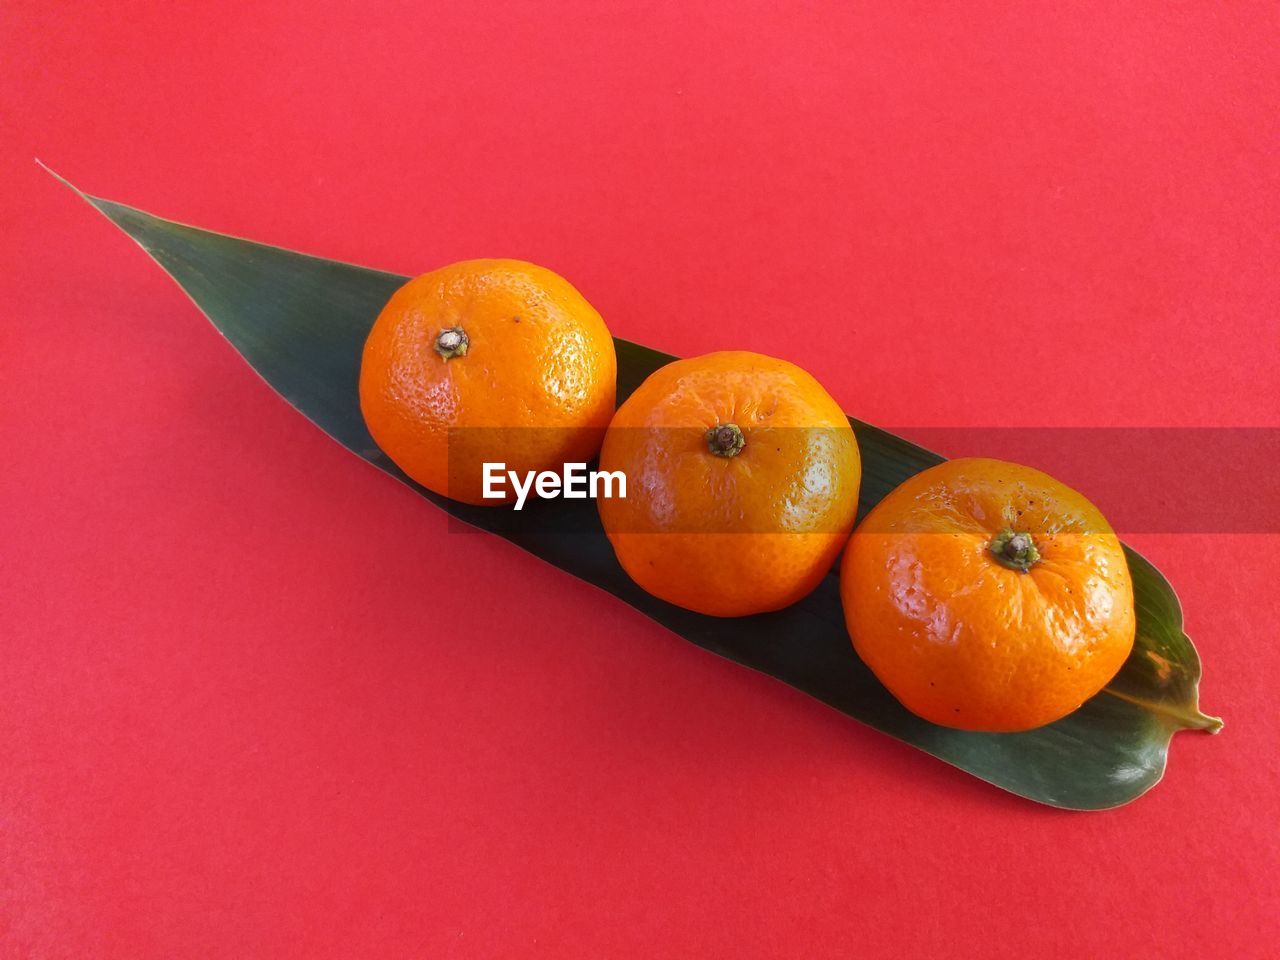 HIGH ANGLE VIEW OF ORANGES AND ORANGE ON PINK